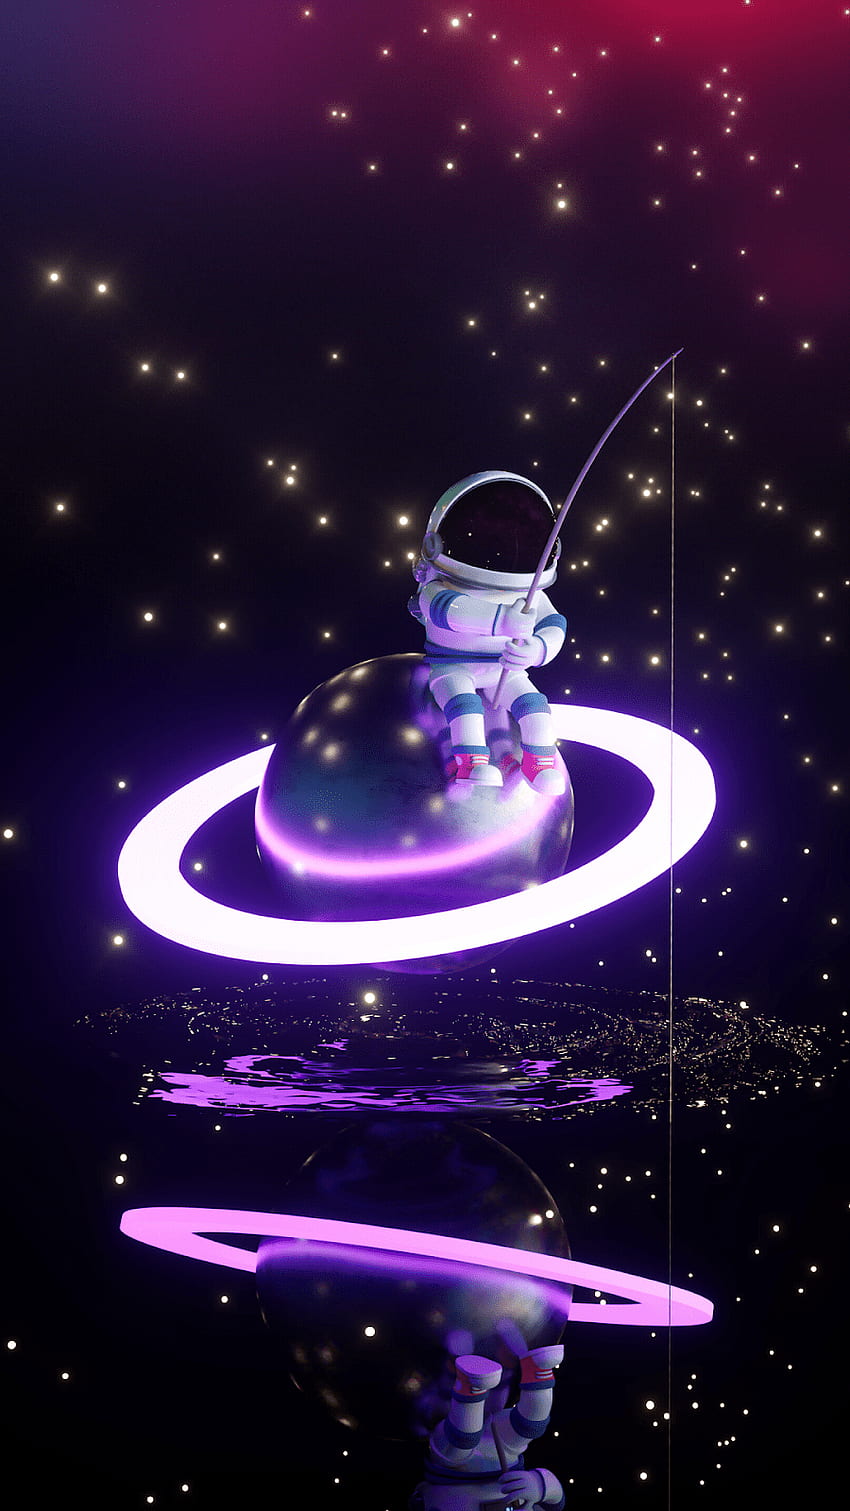 Astronaut - Awesome, Cool 3D Astronaut HD phone wallpaper